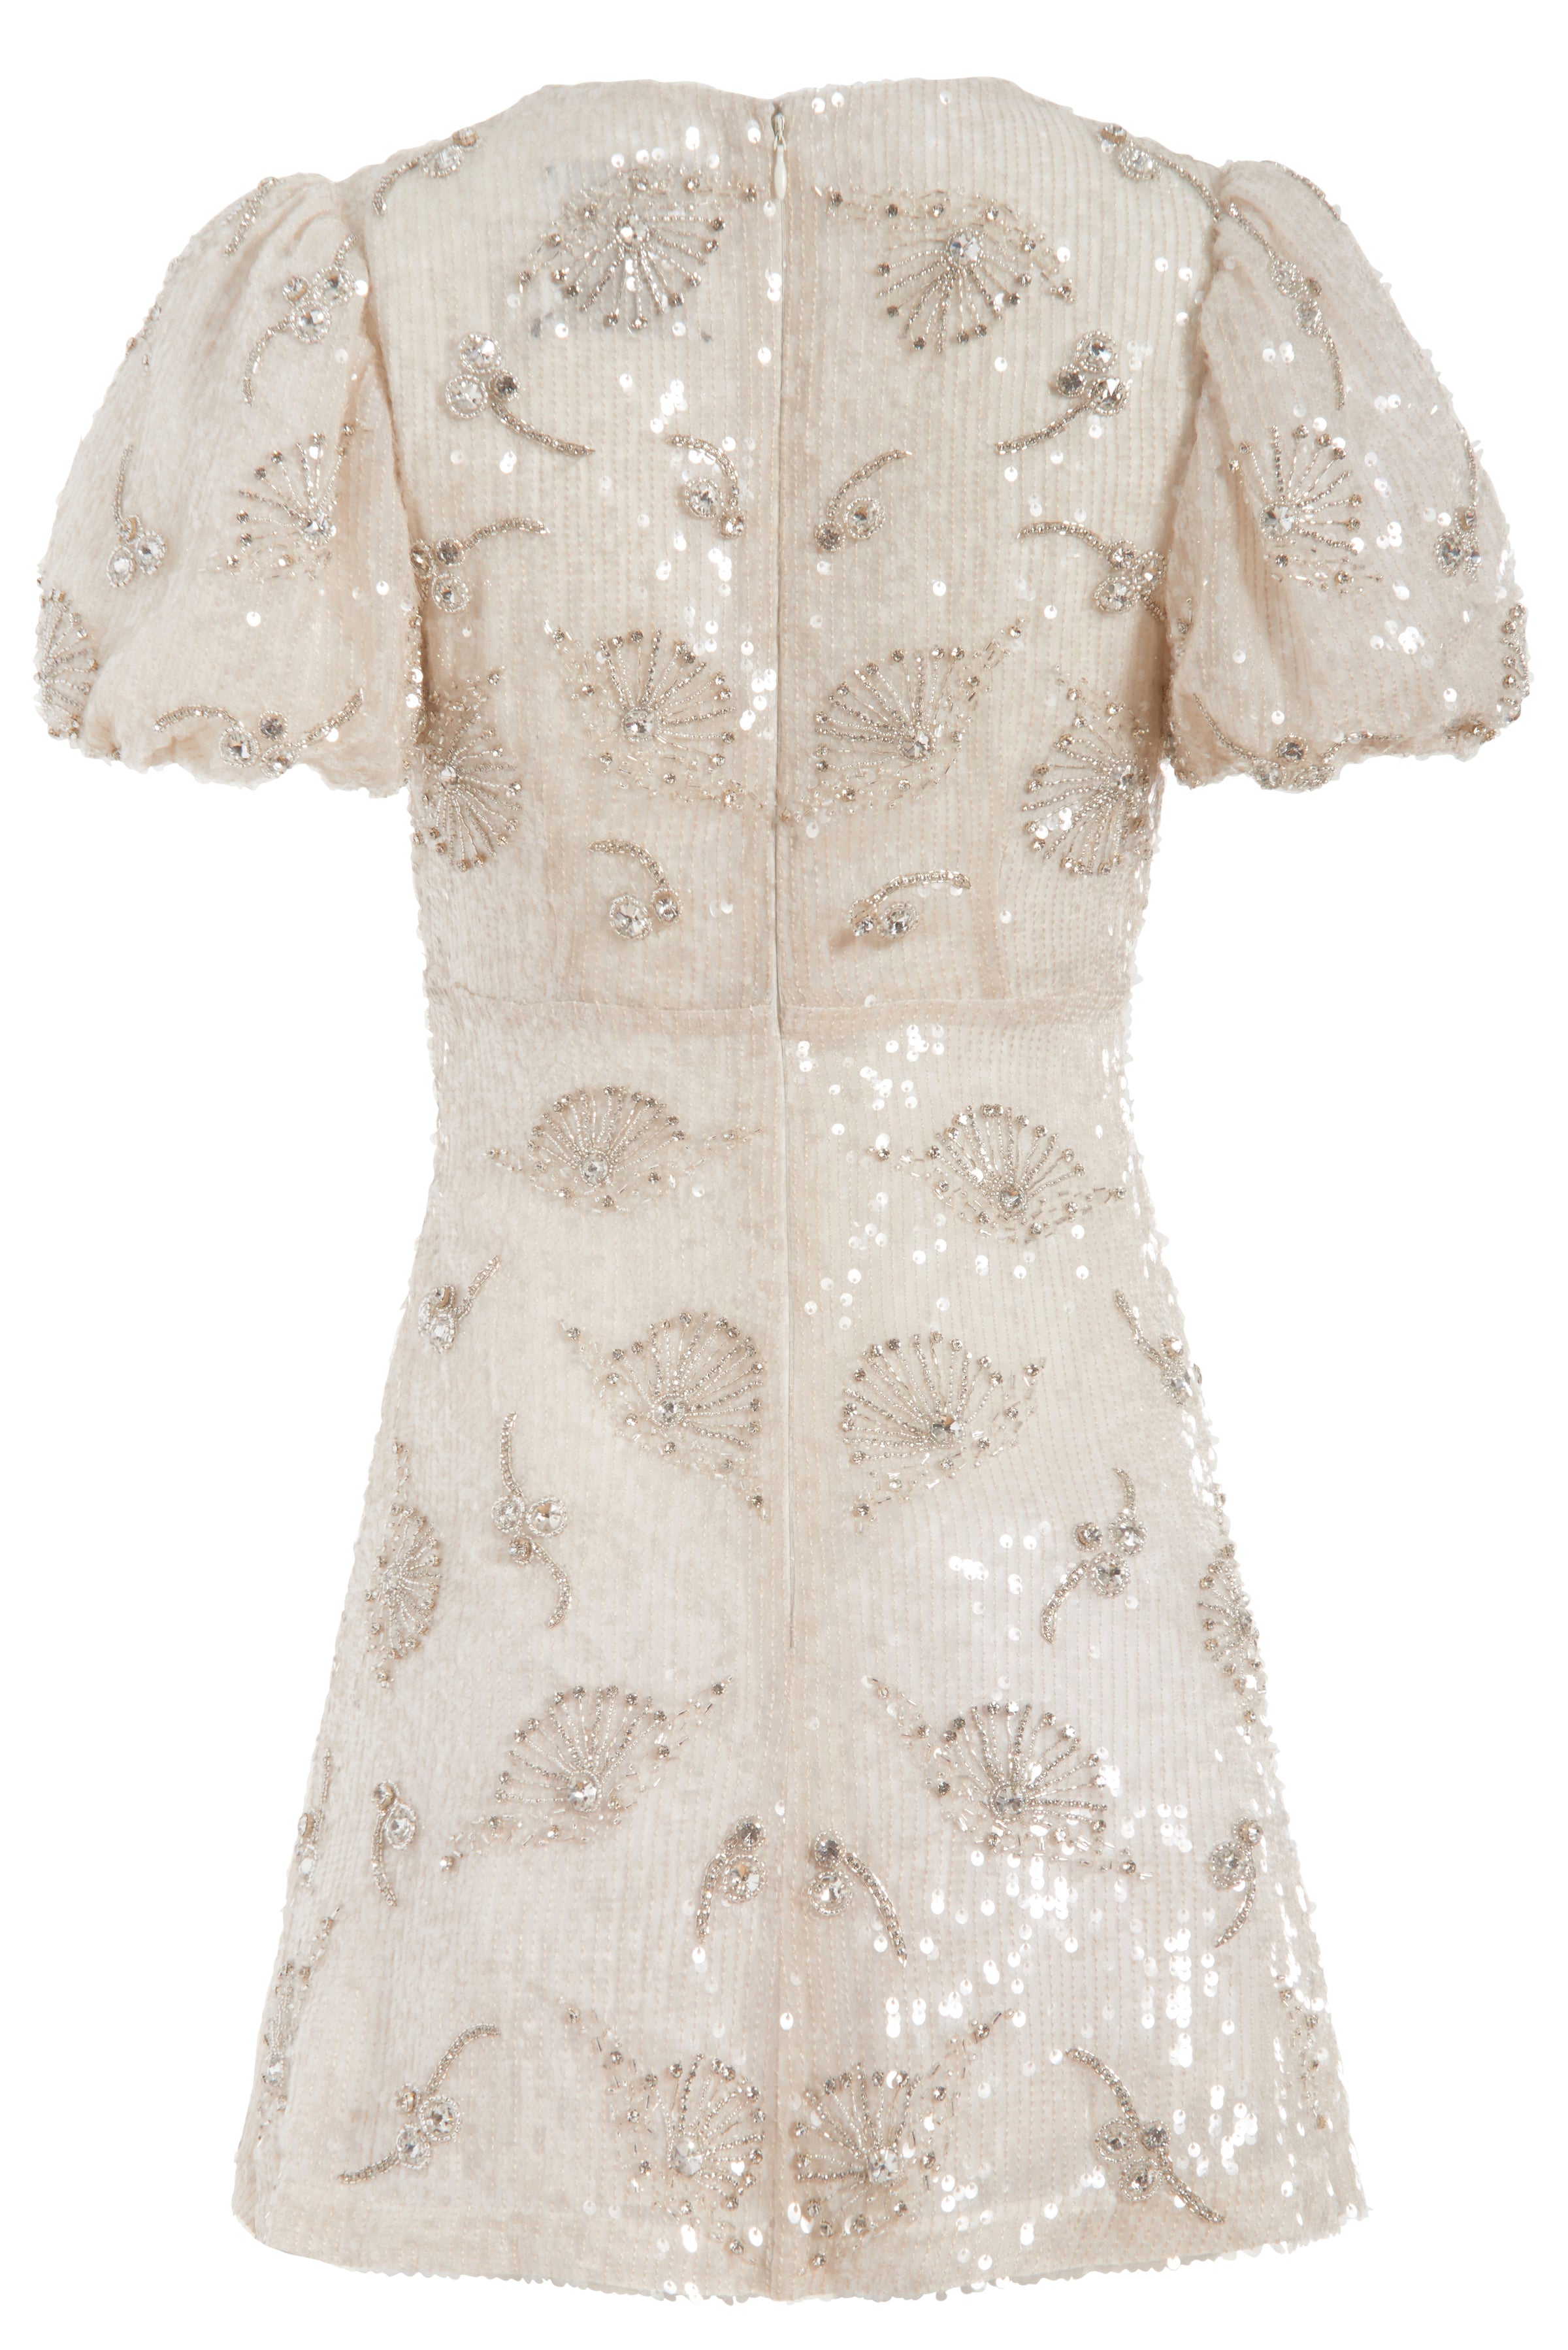 Ethel Ivory Floral Crystal Sequin Puff Mini Dress